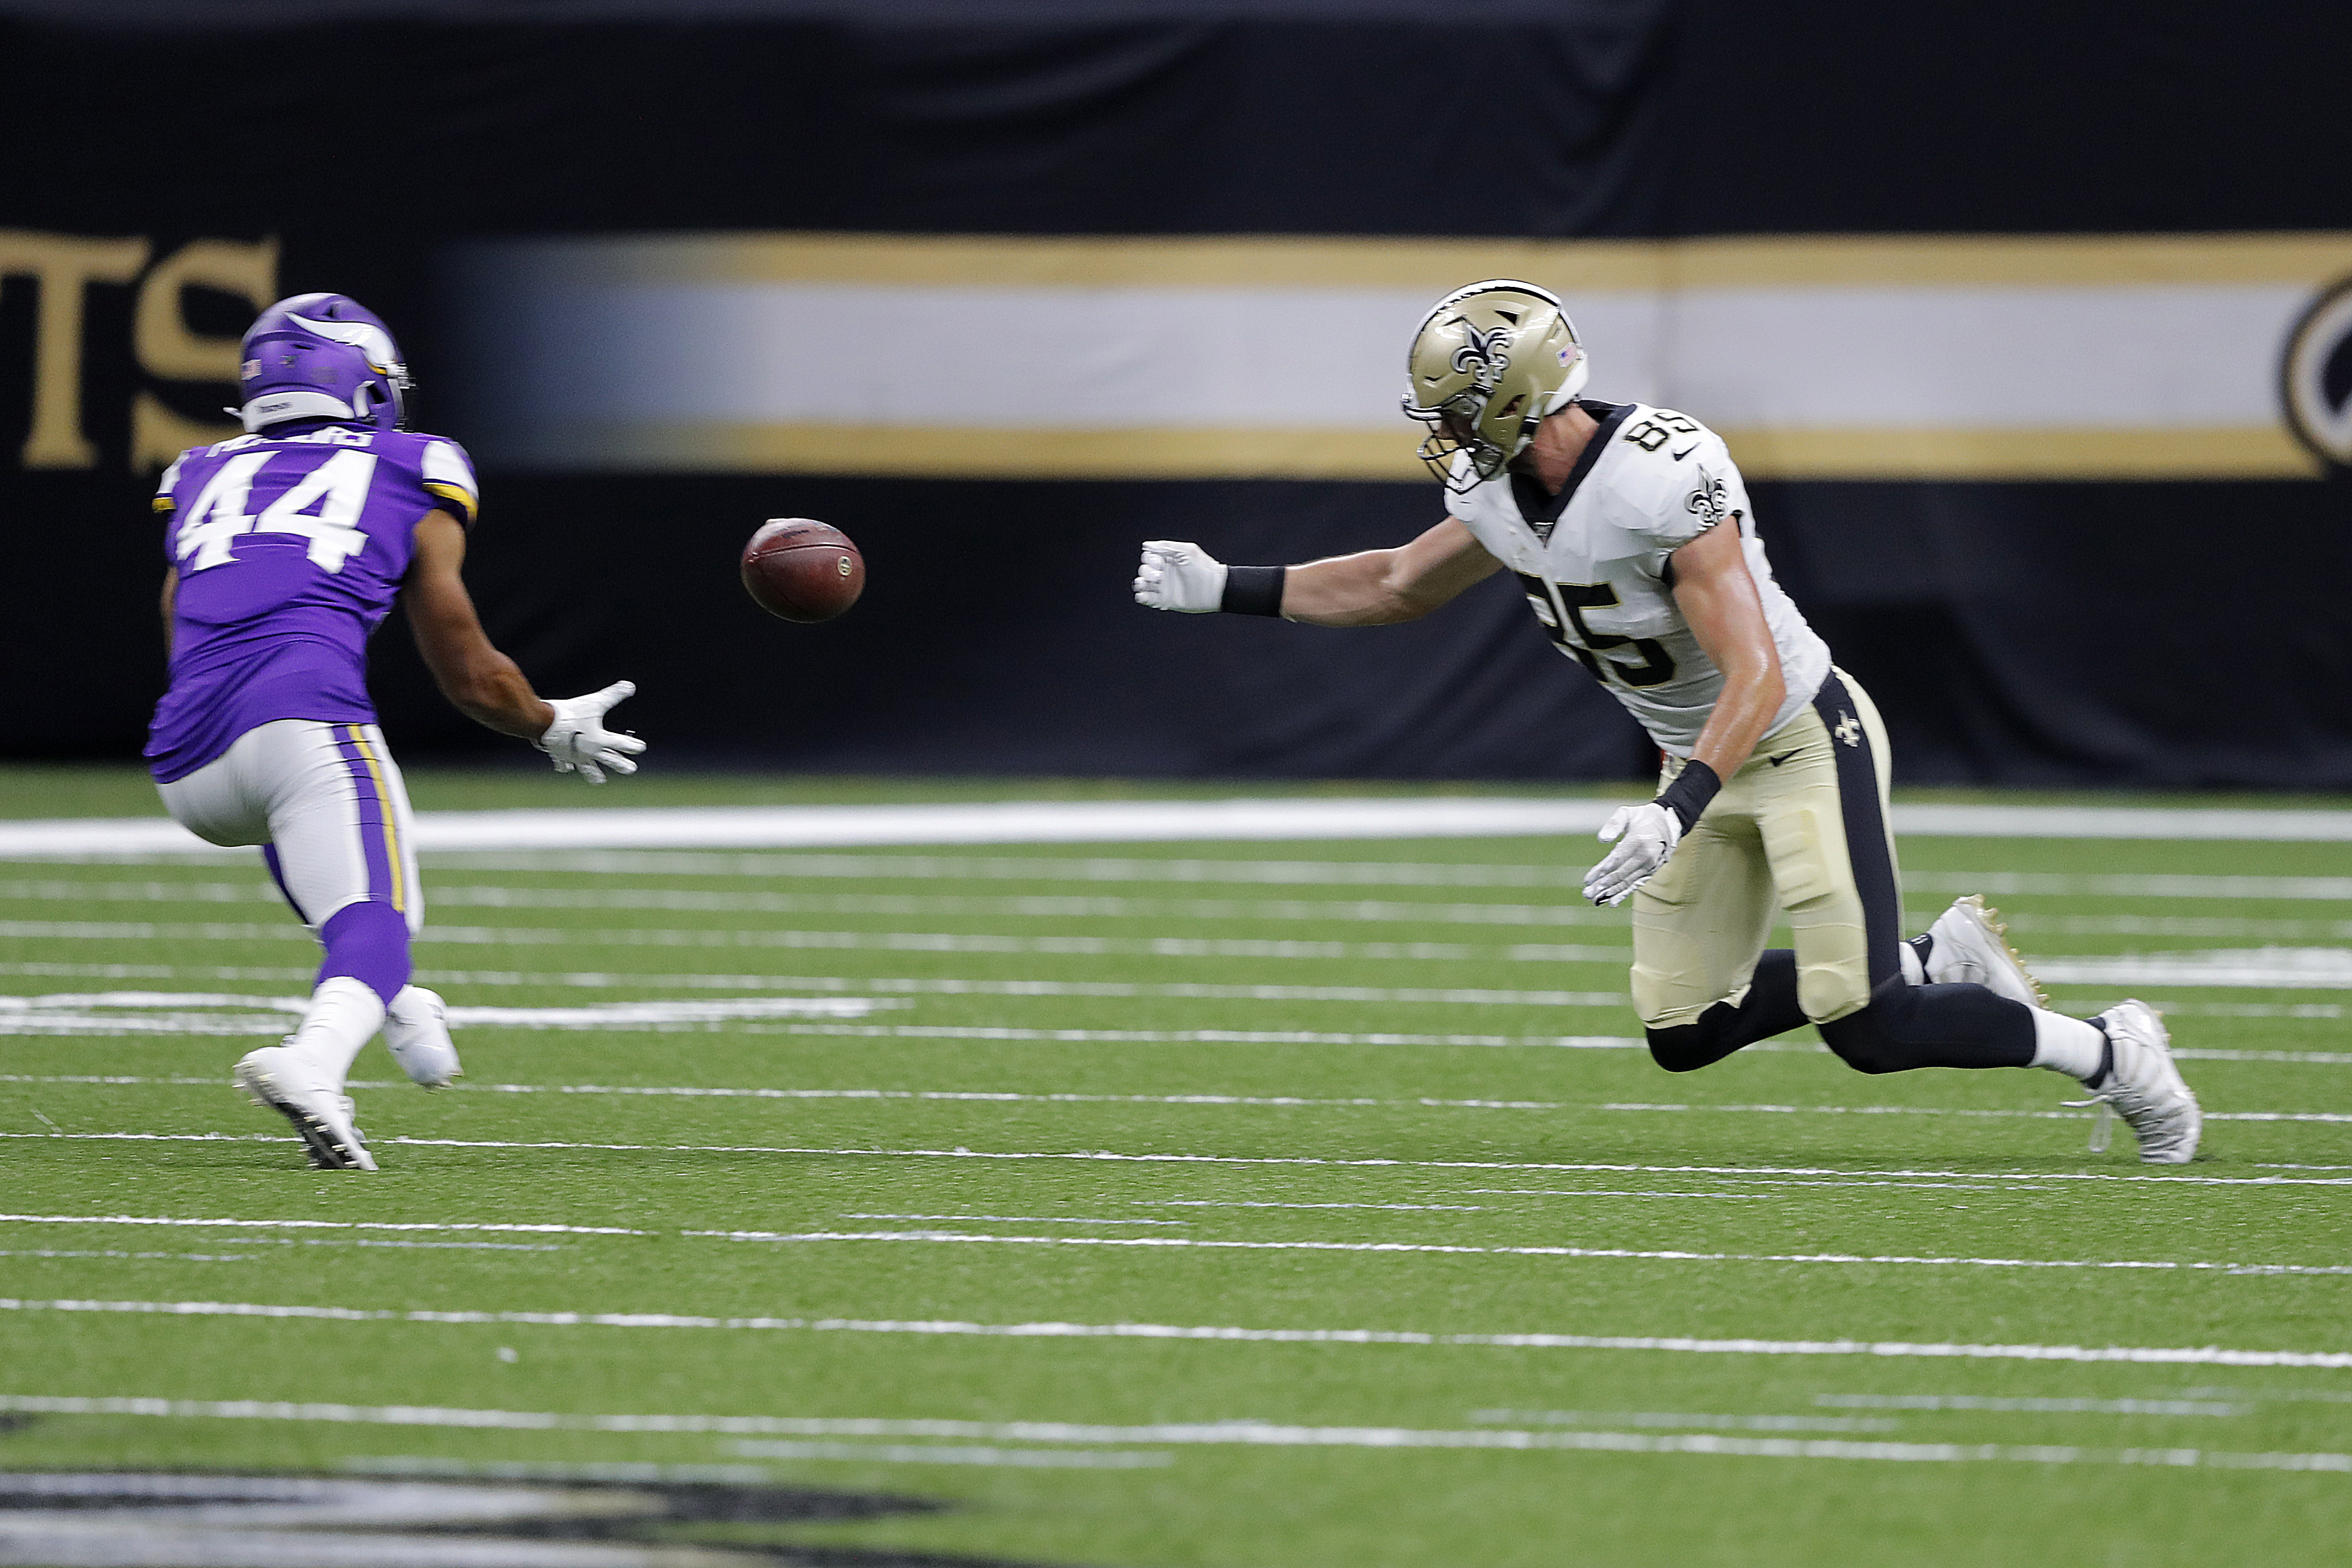 Vikings look good on offense in 34-25 win over Saints